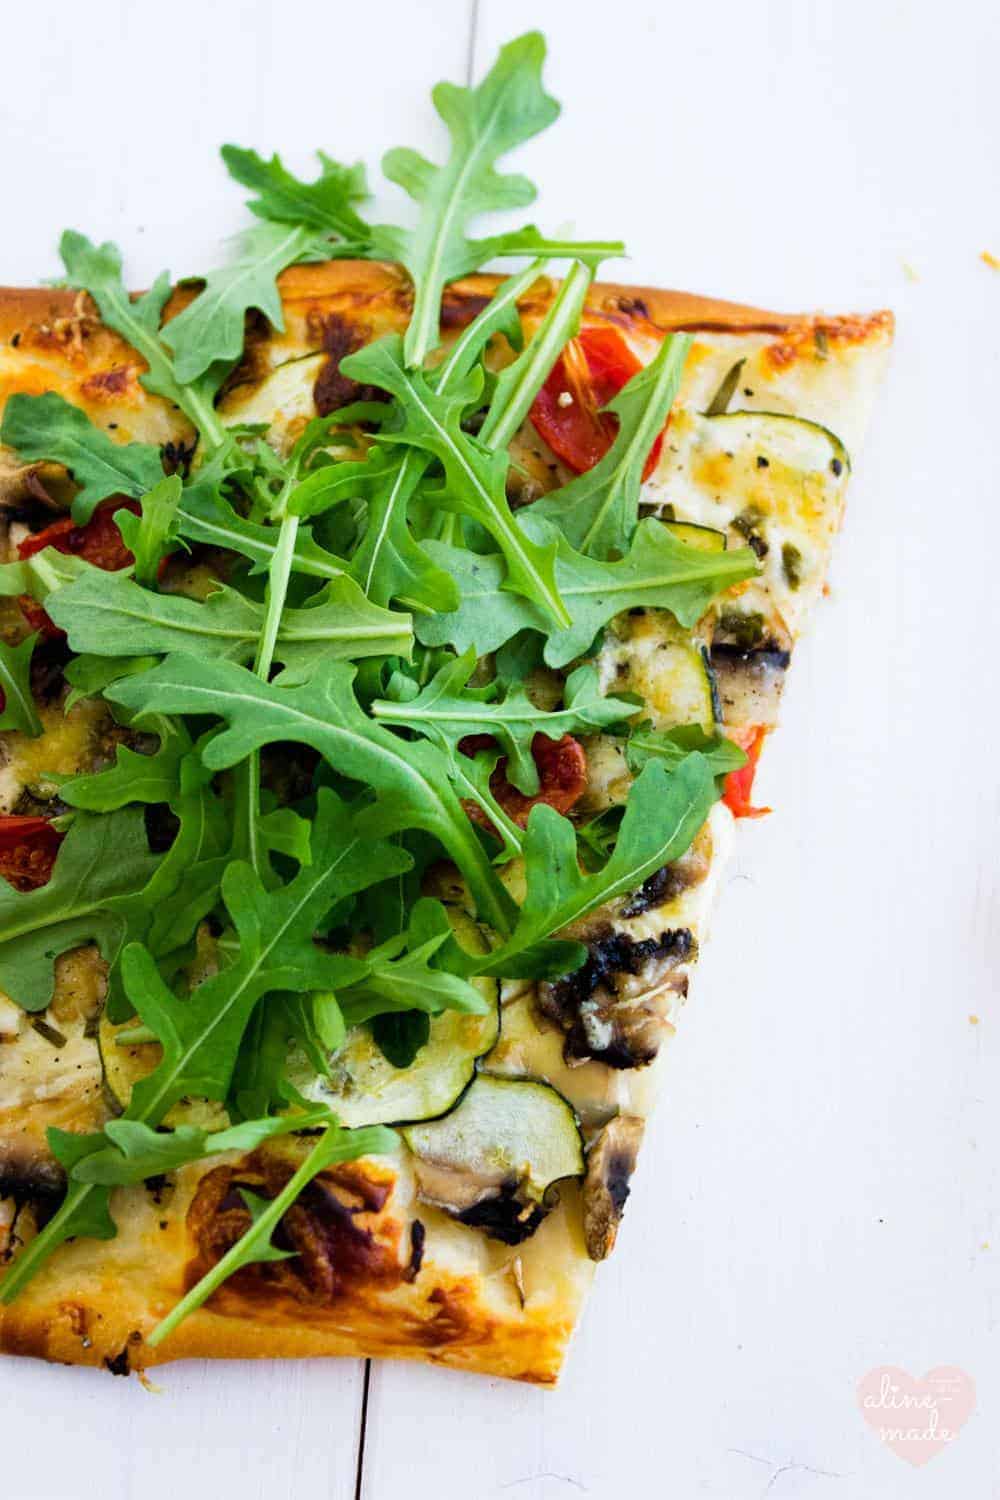 Quick Veggie Pizza with Quark and Topped with Rocket